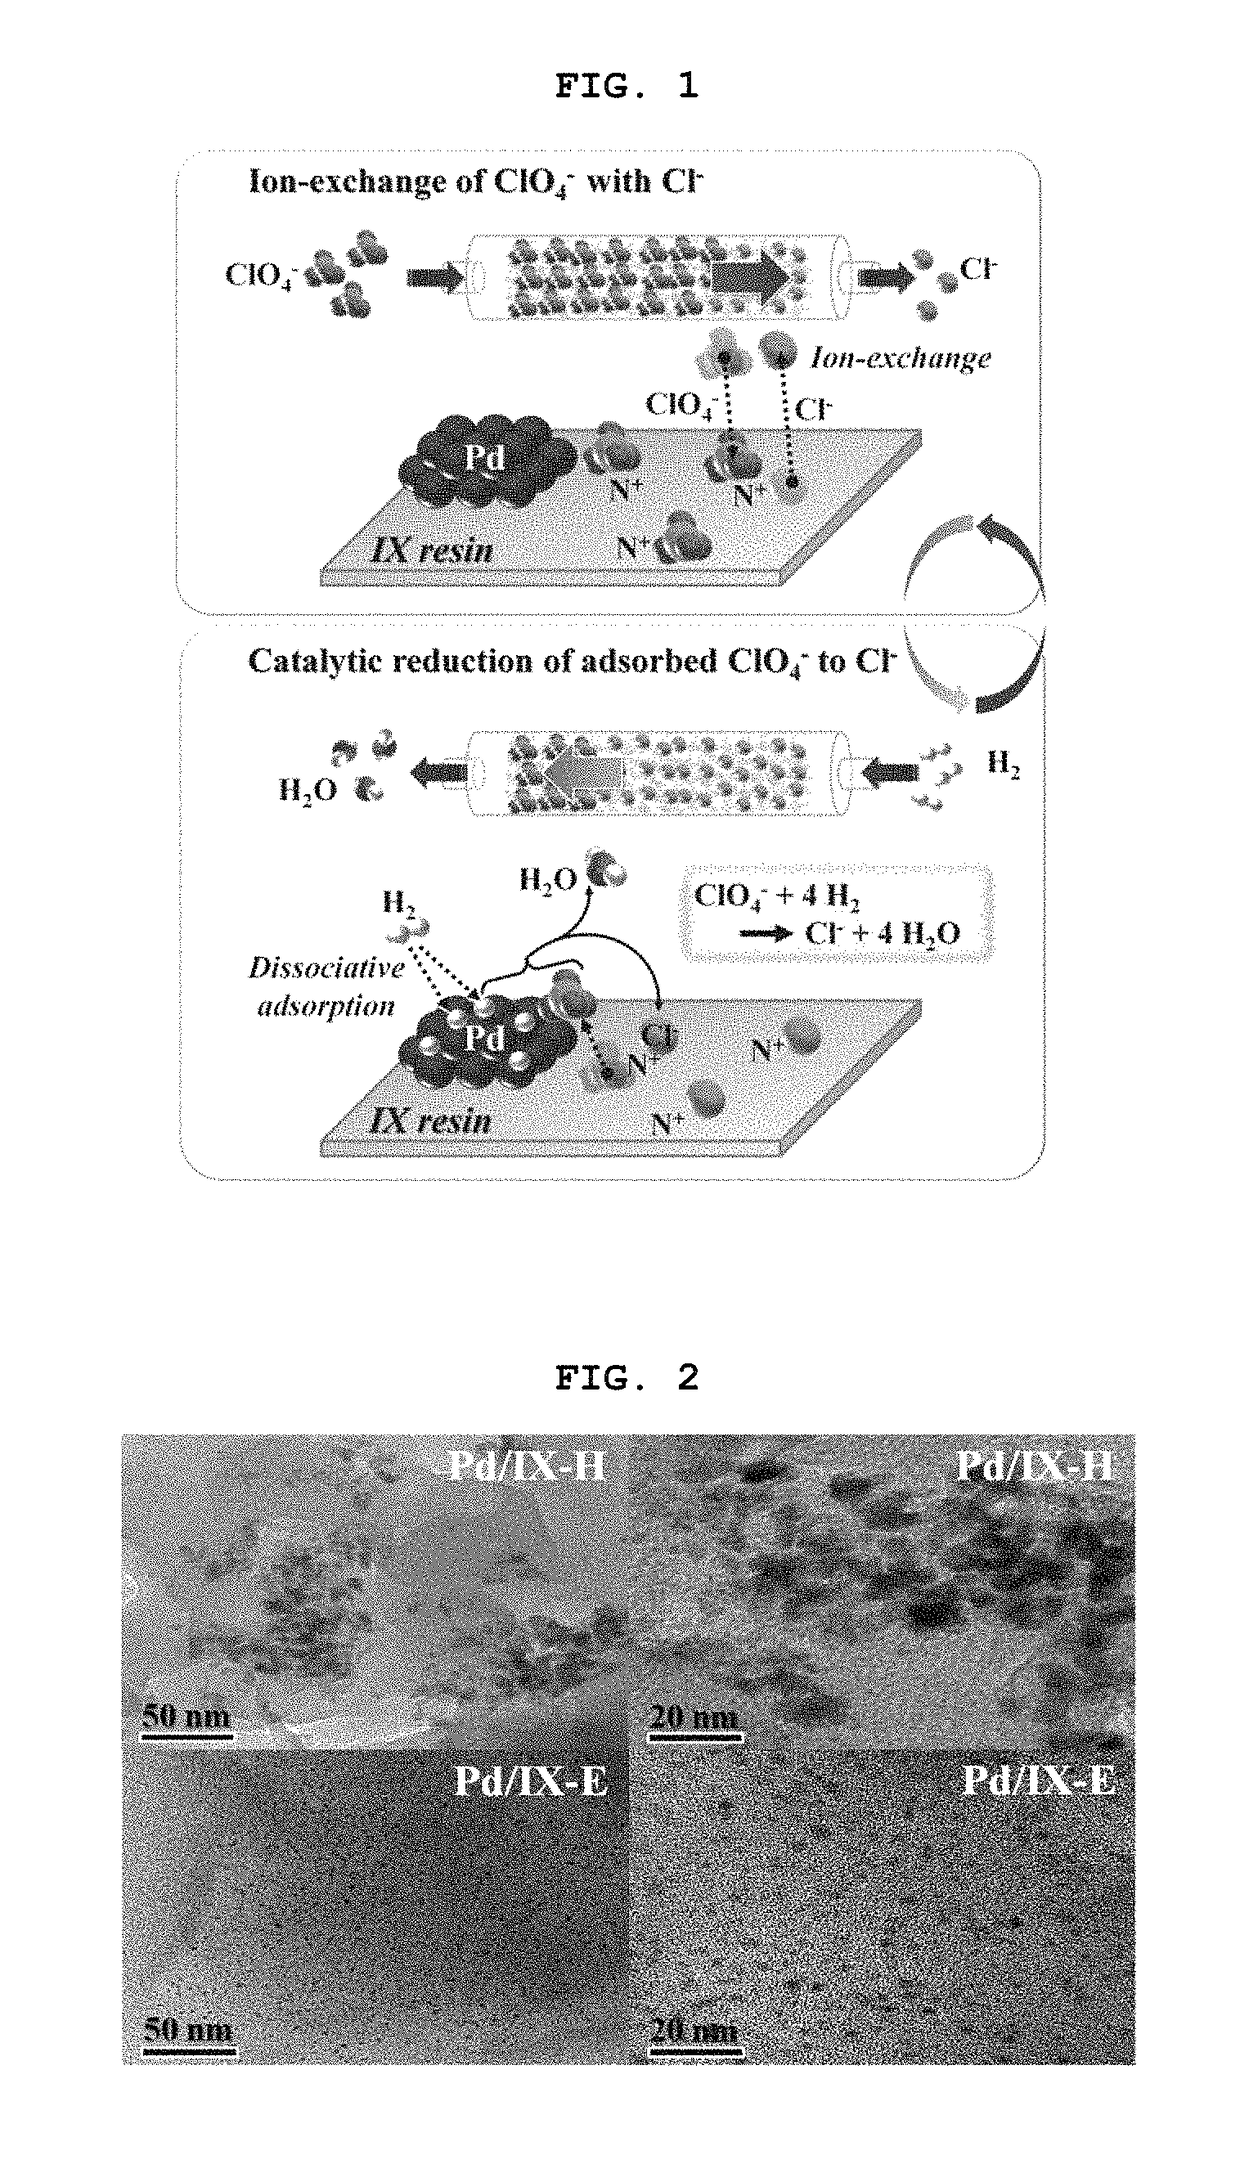 Metal-supported anion exchange resins and method of remediating toxic anions using the same